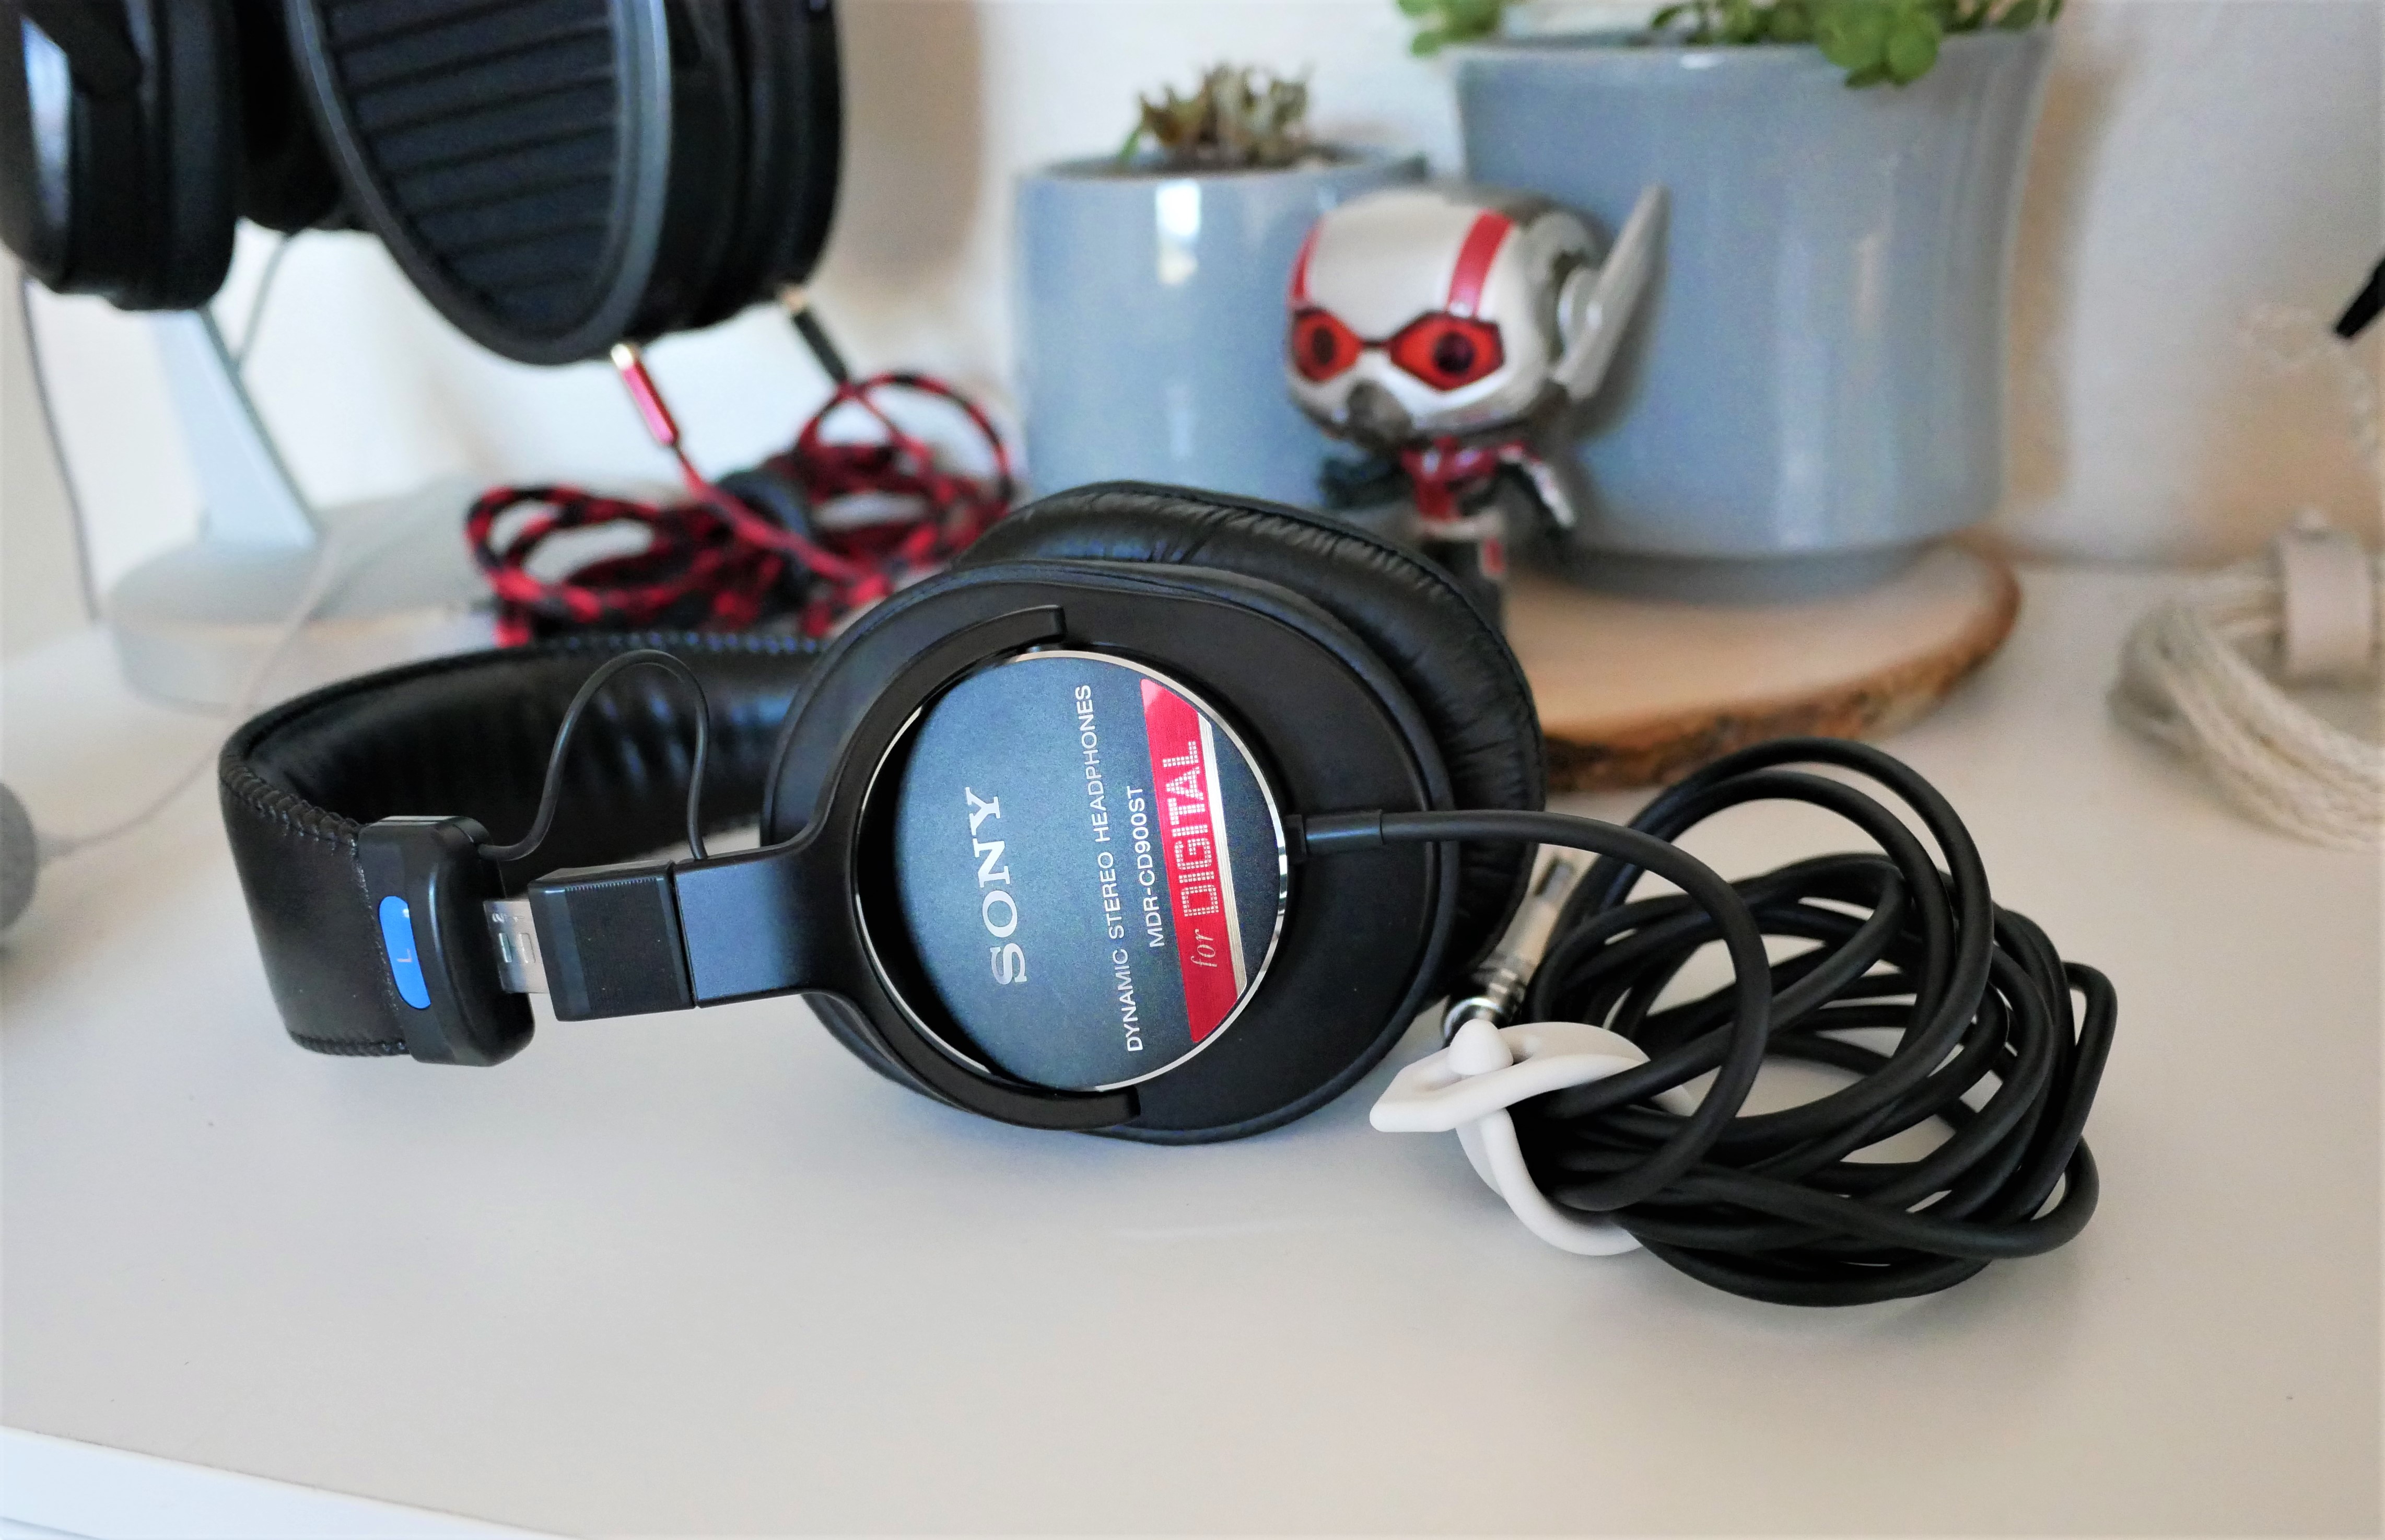 Impressions of the Sony MDR-CD900ST